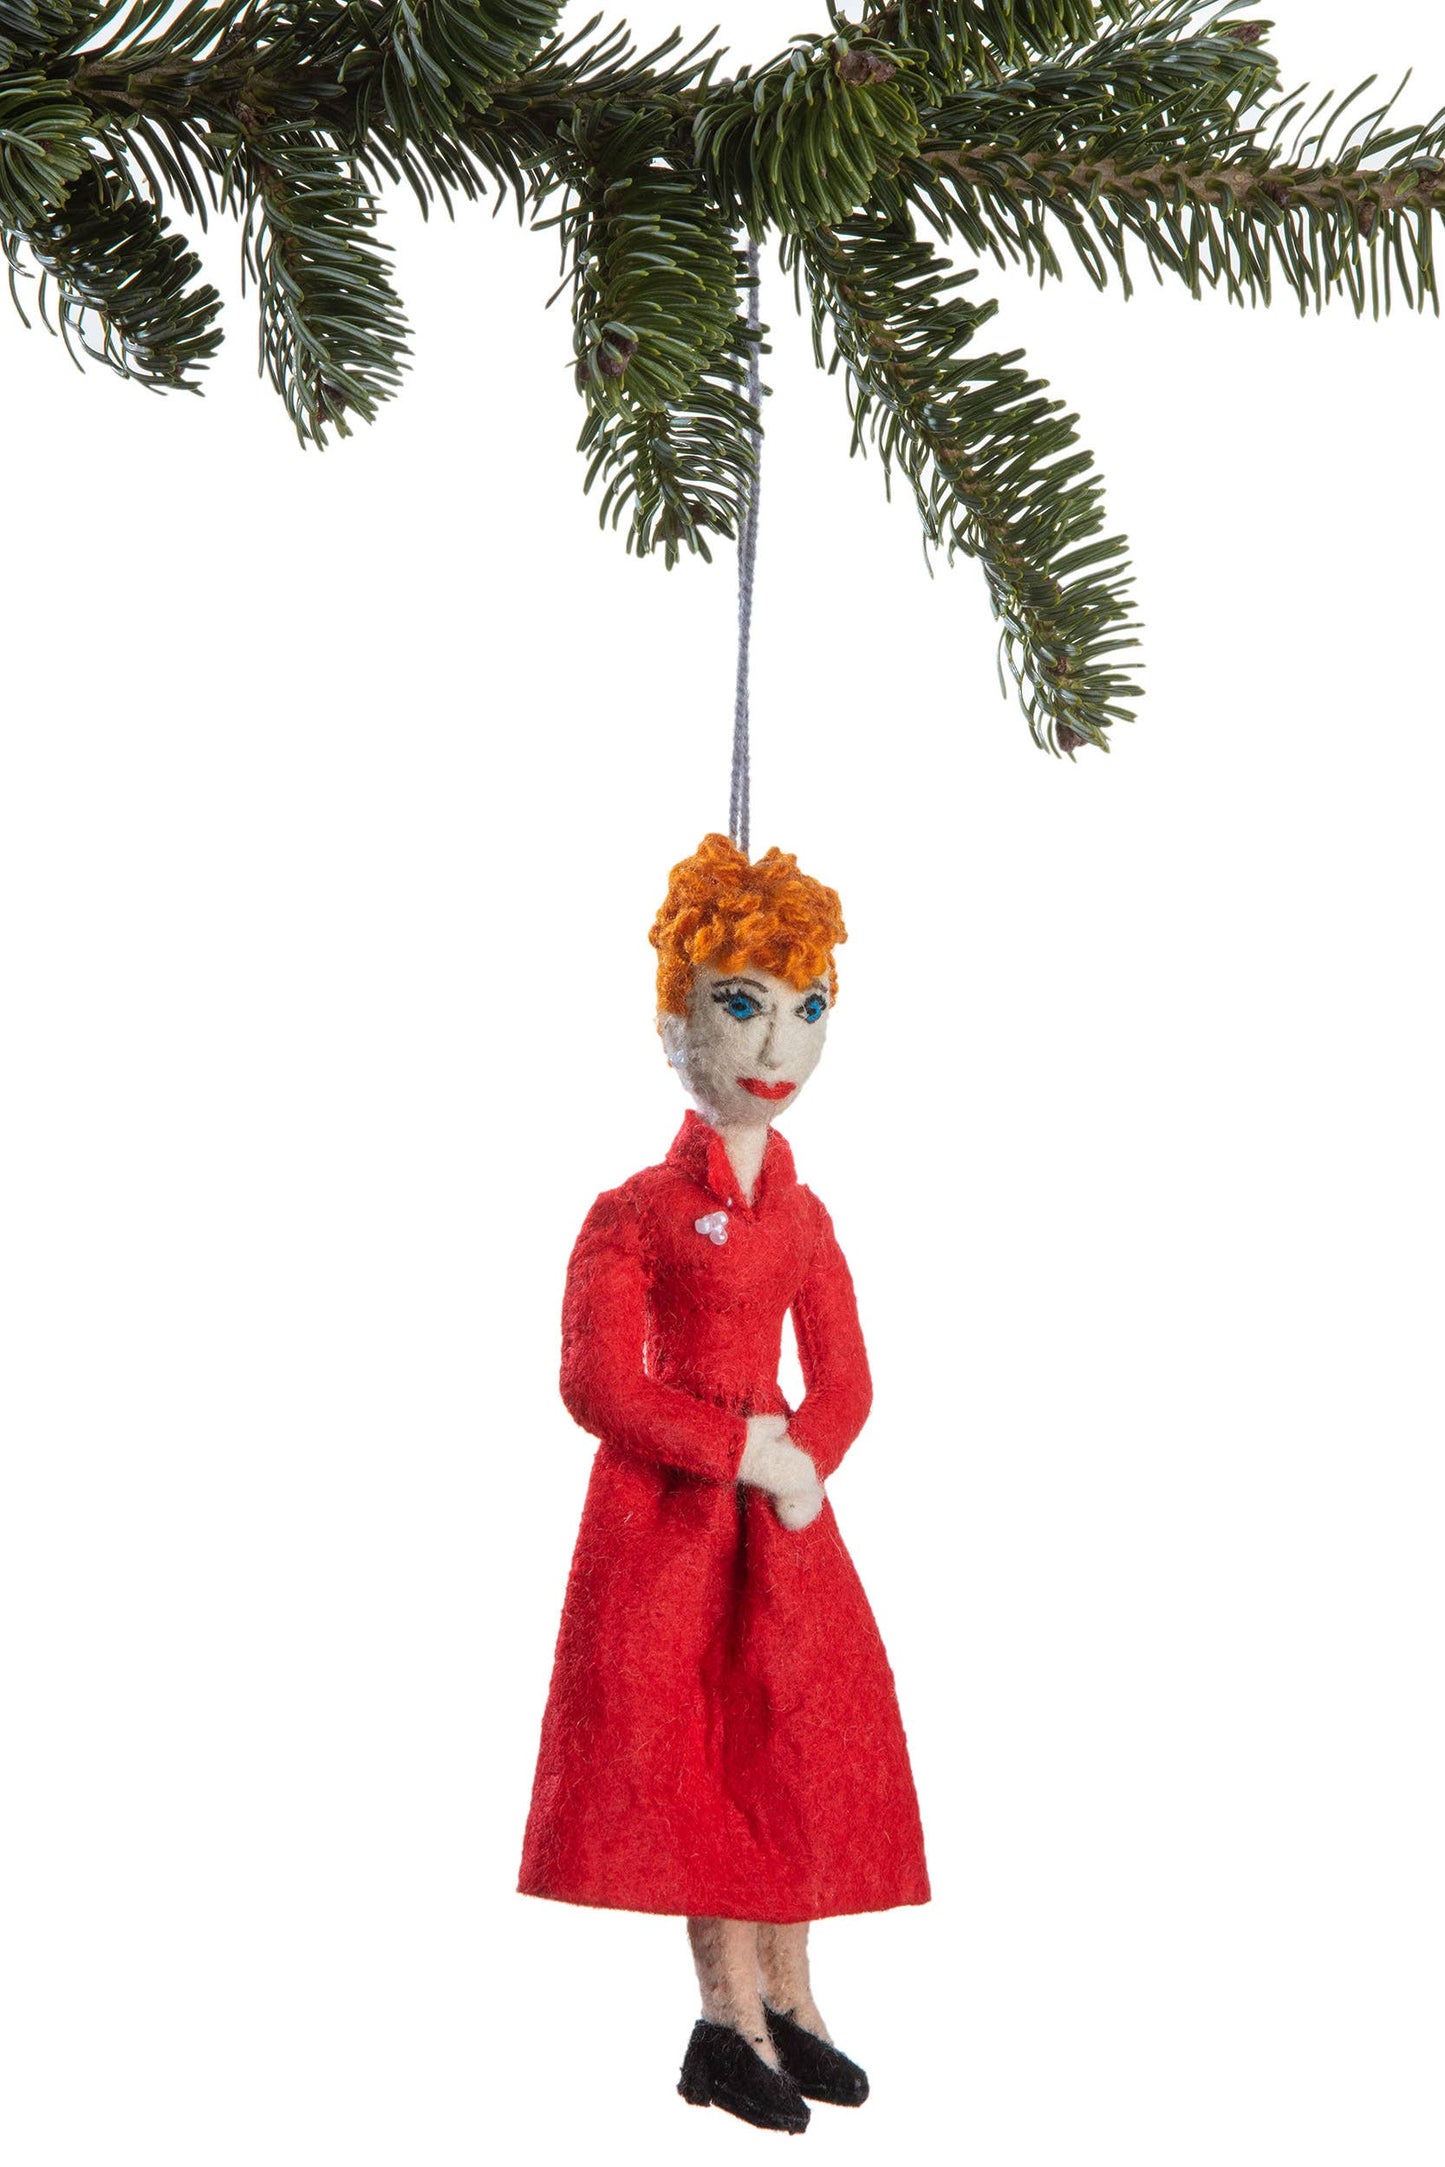 Ornaments: Lucille Ball